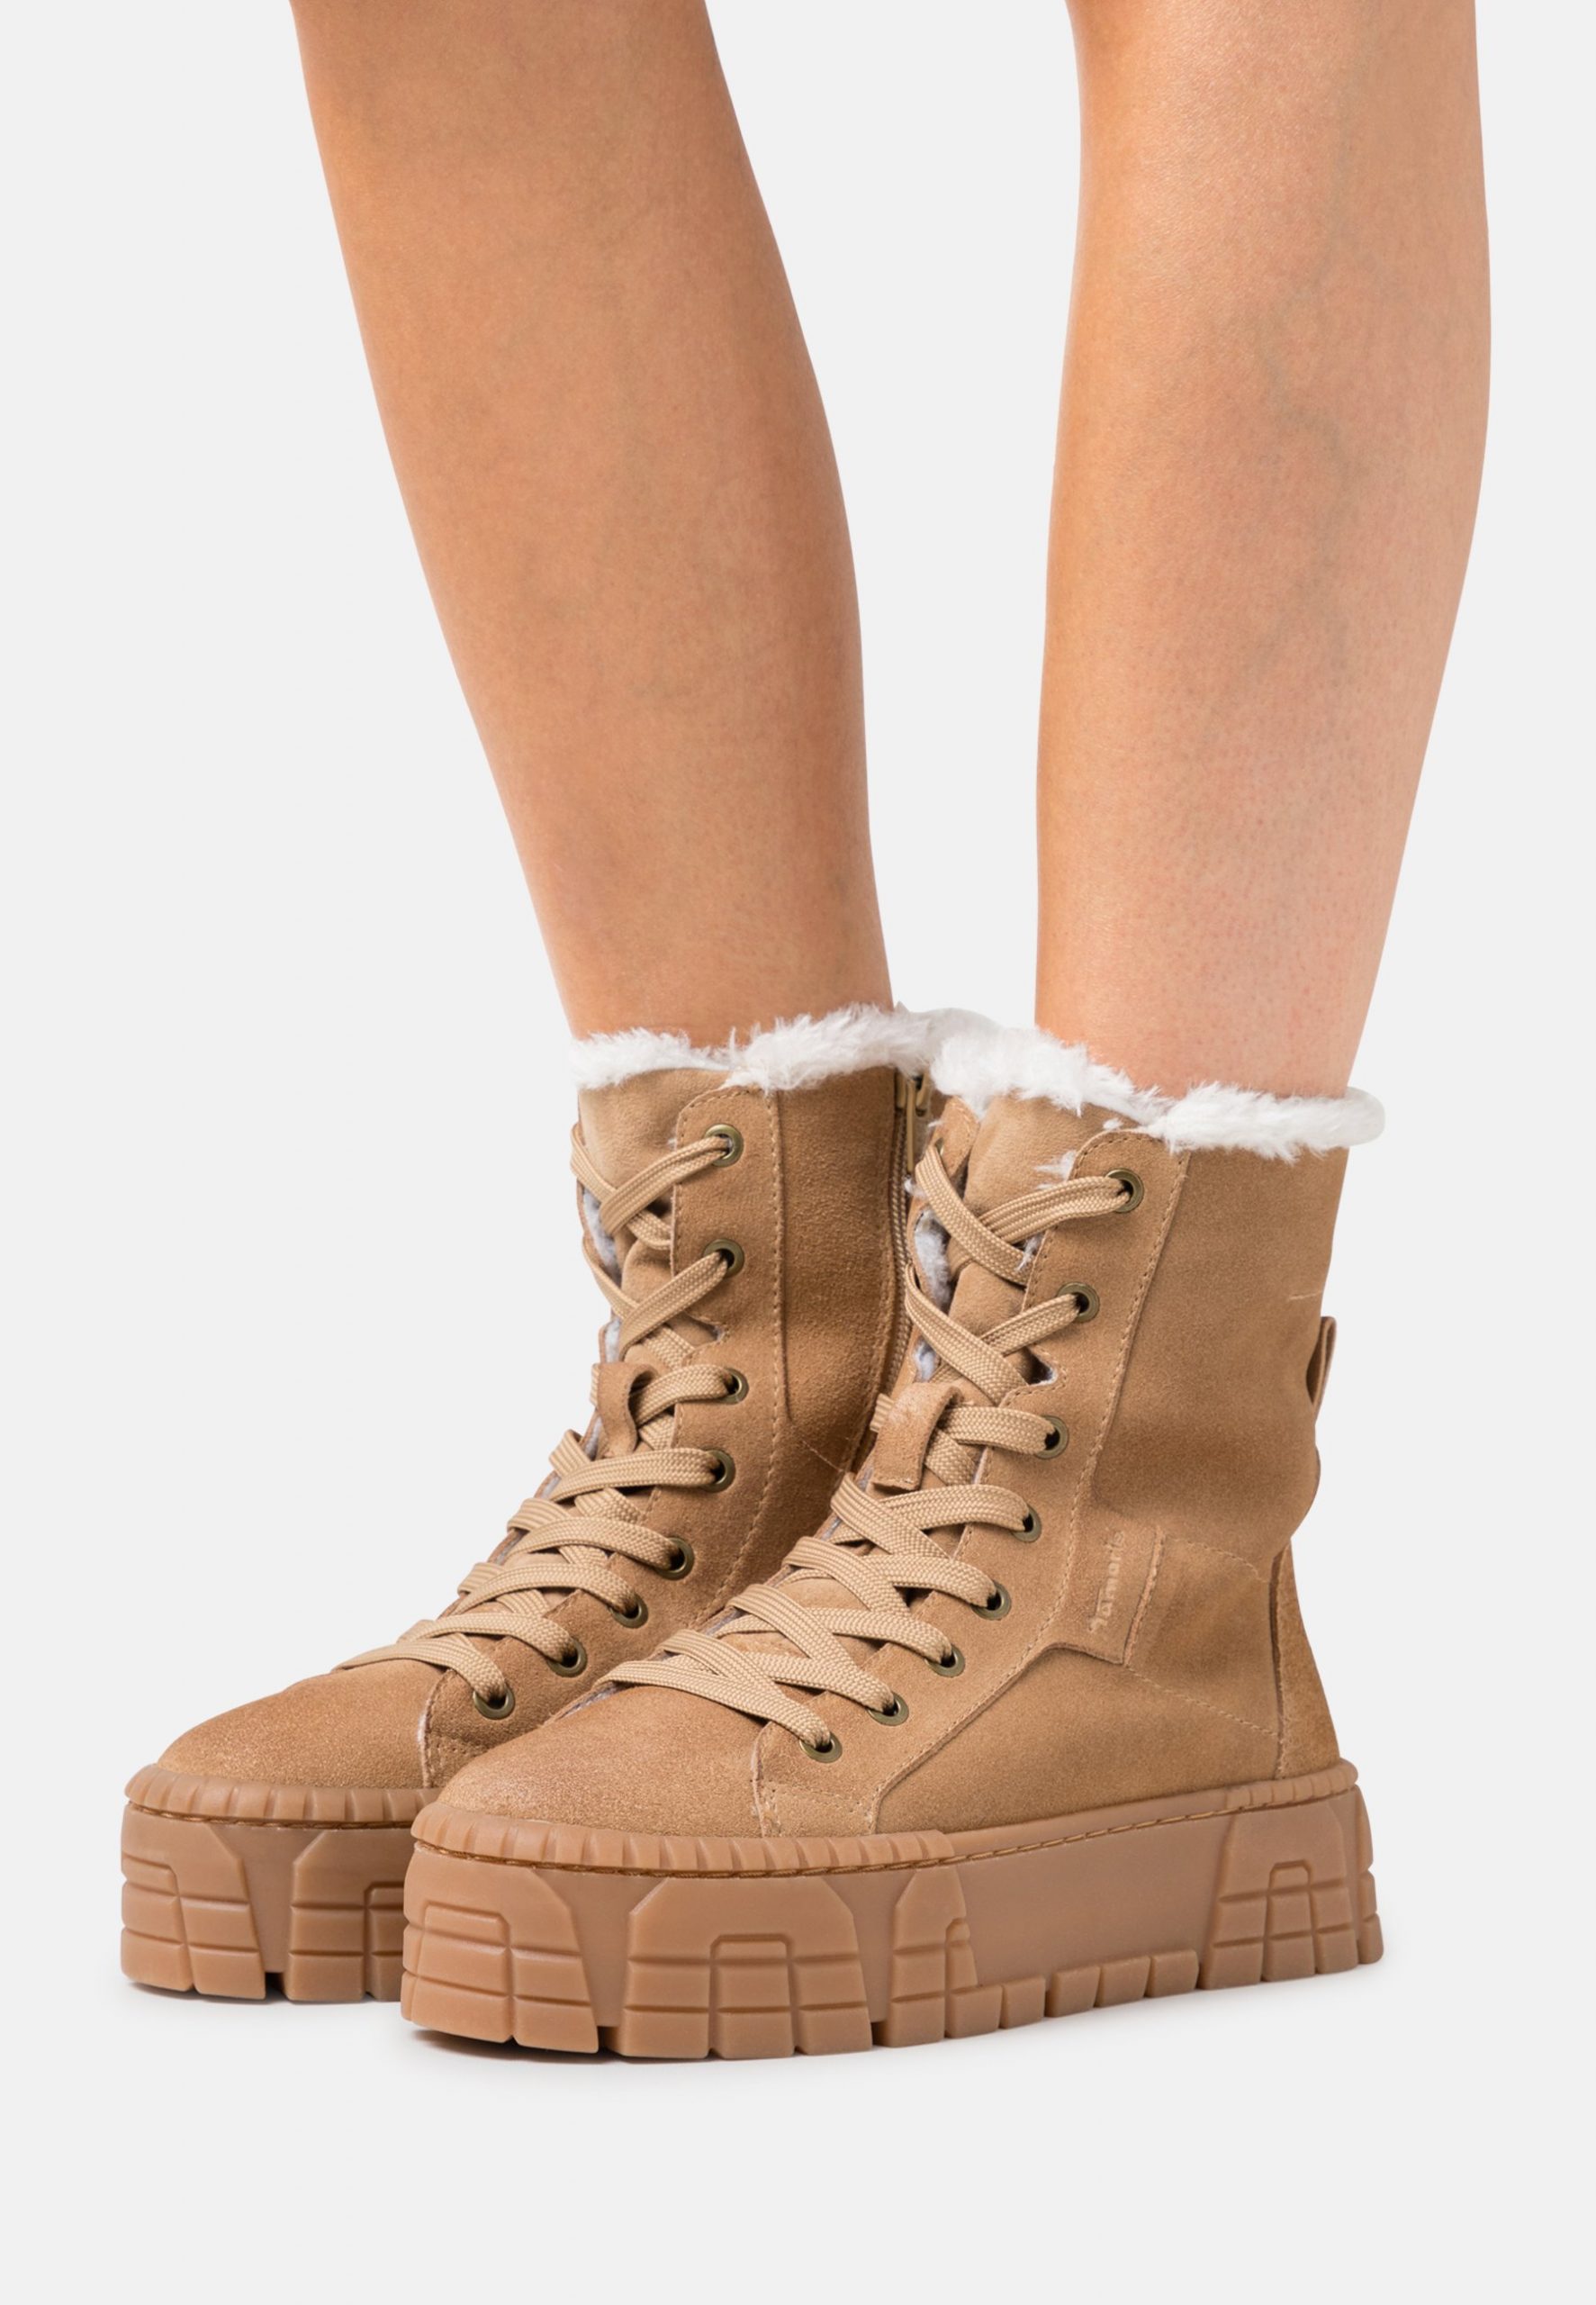 Tamaris Online Store Winter boots & Clearance | free delivery over at shoetamaris.com